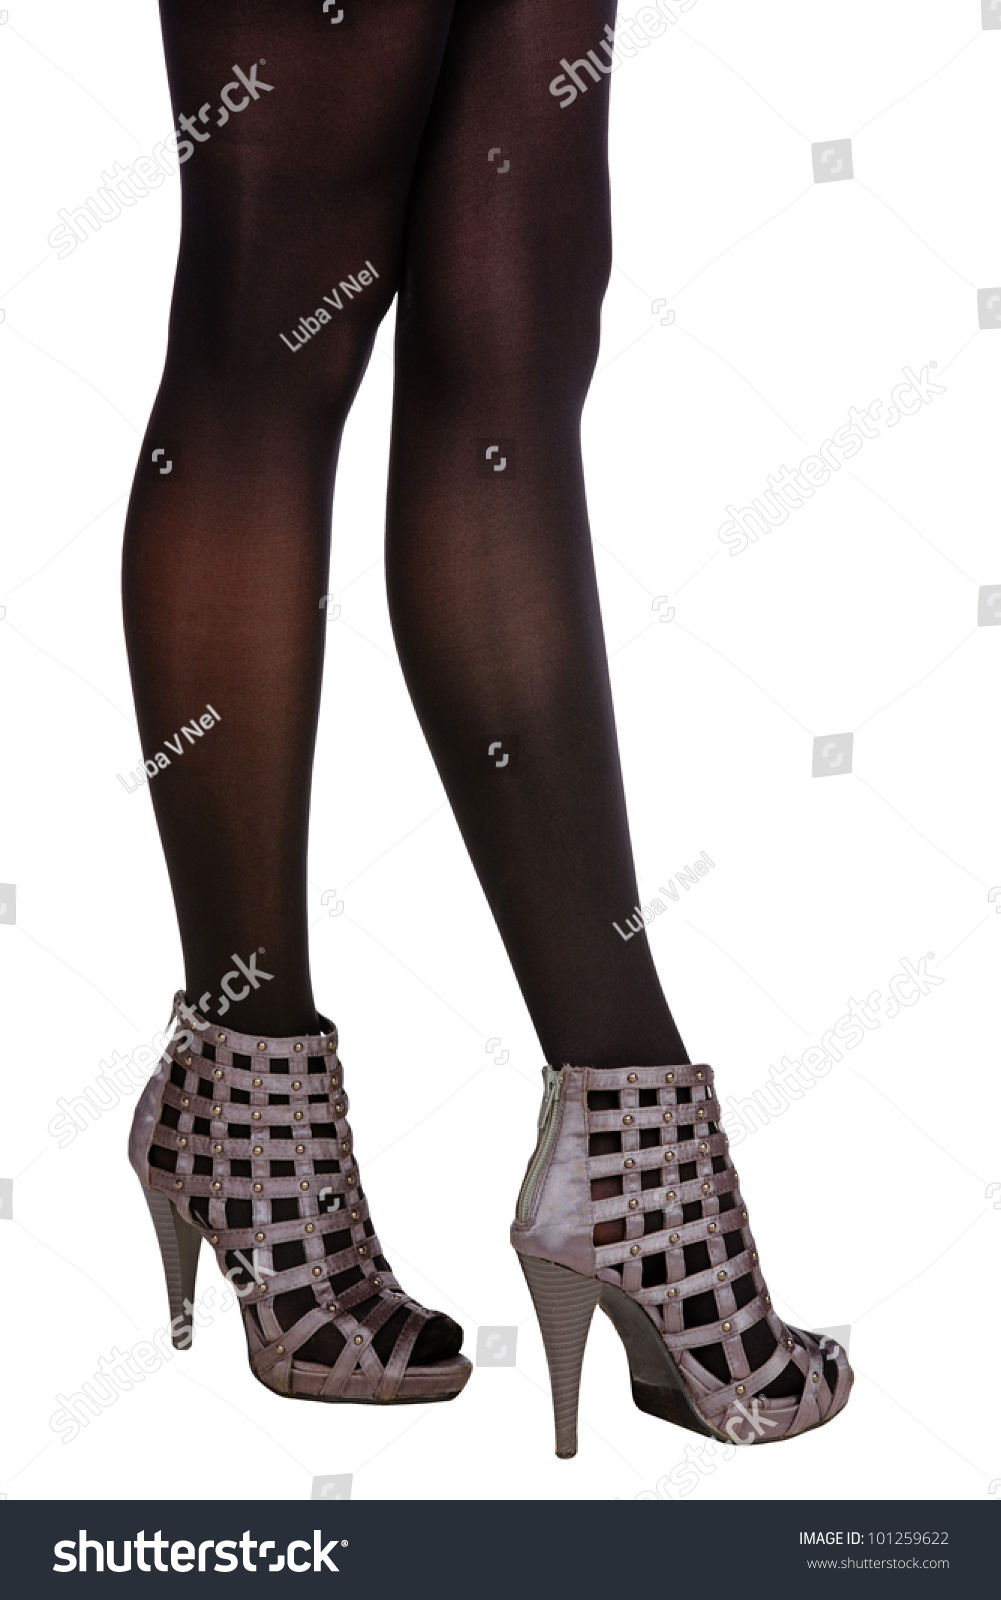 Woman With Long Legs In Black Stockings Wearing Satin Gladiator Sandals ...